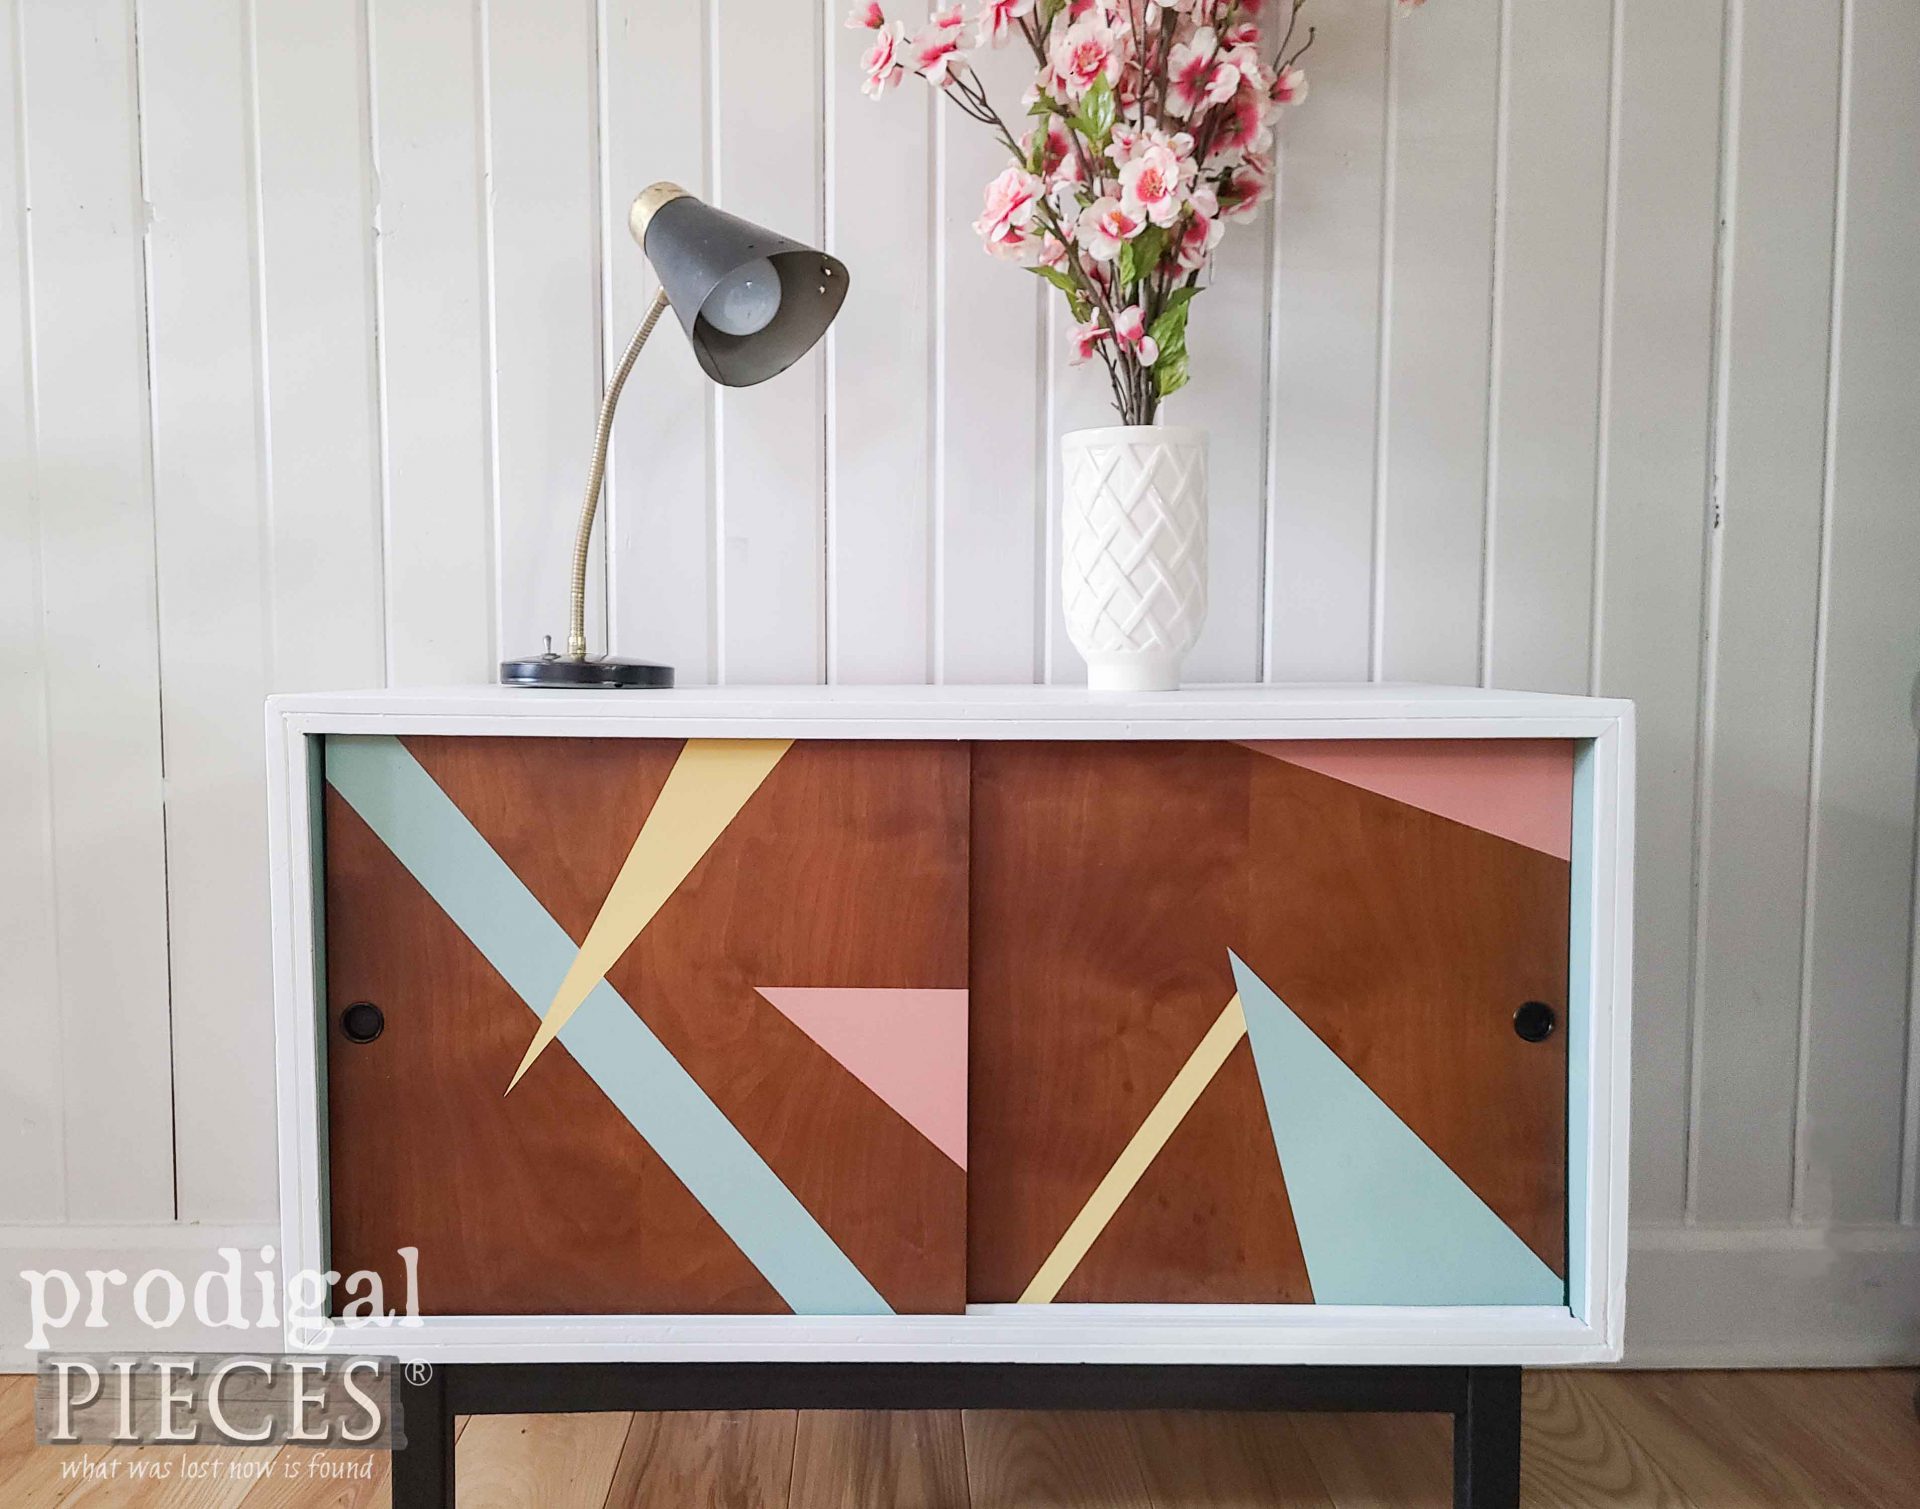 Mid Century Modern Record Player Stand | Vintage Lane Entertainment Stand by Larissa of Prodigal Pieces | prodigalpieces.com #prodigalpieces #vintage #home #furniture